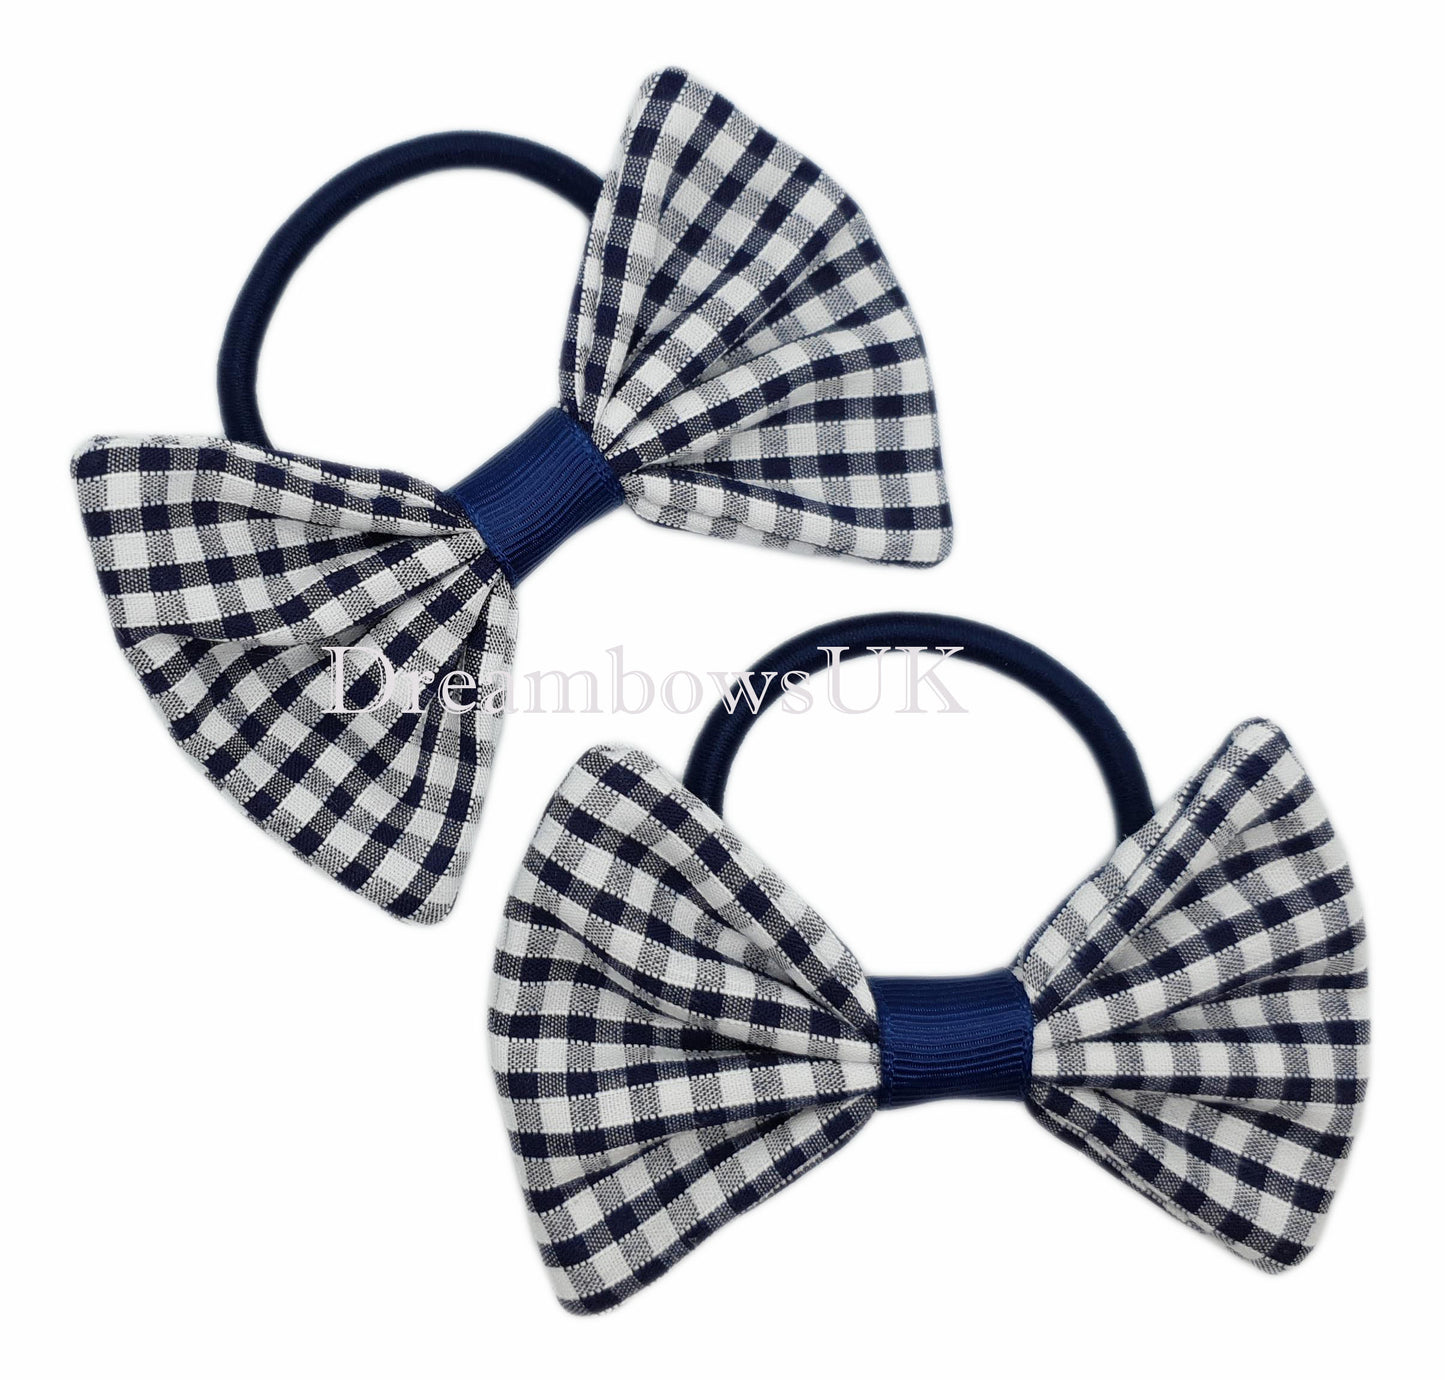 Navy blue gingham hair bows on thin bobbles